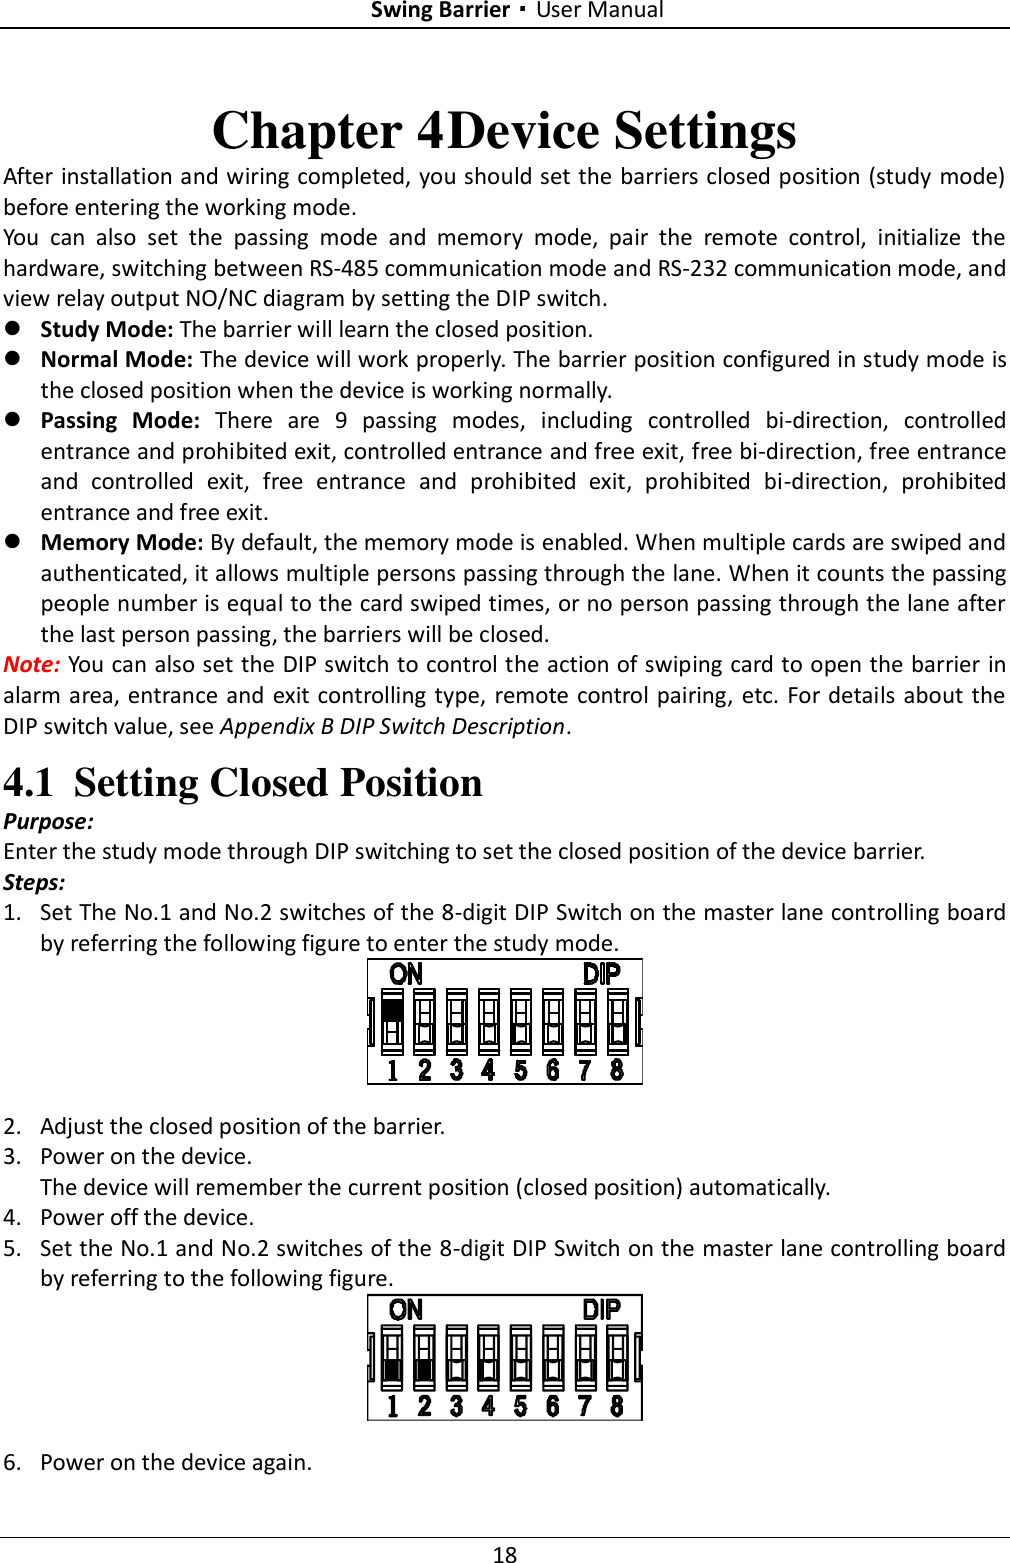 Swing Barrier·User Manual 18 Chapter 4 Device Settings After installation and wiring completed, you should set the barriers closed position (study mode) before entering the working mode. You  can  also  set  the  passing  mode  and  memory  mode,  pair  the  remote  control,  initialize  the hardware, switching between RS-485 communication mode and RS-232 communication mode, and view relay output NO/NC diagram by setting the DIP switch.  Study Mode: The barrier will learn the closed position.  Normal Mode: The device will work properly. The barrier position configured in study mode is the closed position when the device is working normally.  Passing  Mode:  There  are  9  passing  modes,  including  controlled  bi-direction,  controlled entrance and prohibited exit, controlled entrance and free exit, free bi-direction, free entrance and  controlled  exit,  free  entrance  and  prohibited  exit,  prohibited  bi-direction,  prohibited entrance and free exit.  Memory Mode: By default, the memory mode is enabled. When multiple cards are swiped and authenticated, it allows multiple persons passing through the lane. When it counts the passing people number is equal to the card swiped times, or no person passing through the lane after the last person passing, the barriers will be closed. Note: You can also set the DIP switch to control the action of swiping card to open the barrier in alarm area, entrance and exit controlling type,  remote control pairing, etc. For details about the DIP switch value, see Appendix B DIP Switch Description. 4.1 Setting Closed Position Purpose: Enter the study mode through DIP switching to set the closed position of the device barrier. Steps: 1. Set The No.1 and No.2 switches of the 8-digit DIP Switch on the master lane controlling board by referring the following figure to enter the study mode.  2. Adjust the closed position of the barrier. 3. Power on the device. The device will remember the current position (closed position) automatically. 4. Power off the device. 5. Set the No.1 and No.2 switches of the 8-digit DIP Switch on the master lane controlling board by referring to the following figure.  6. Power on the device again.   